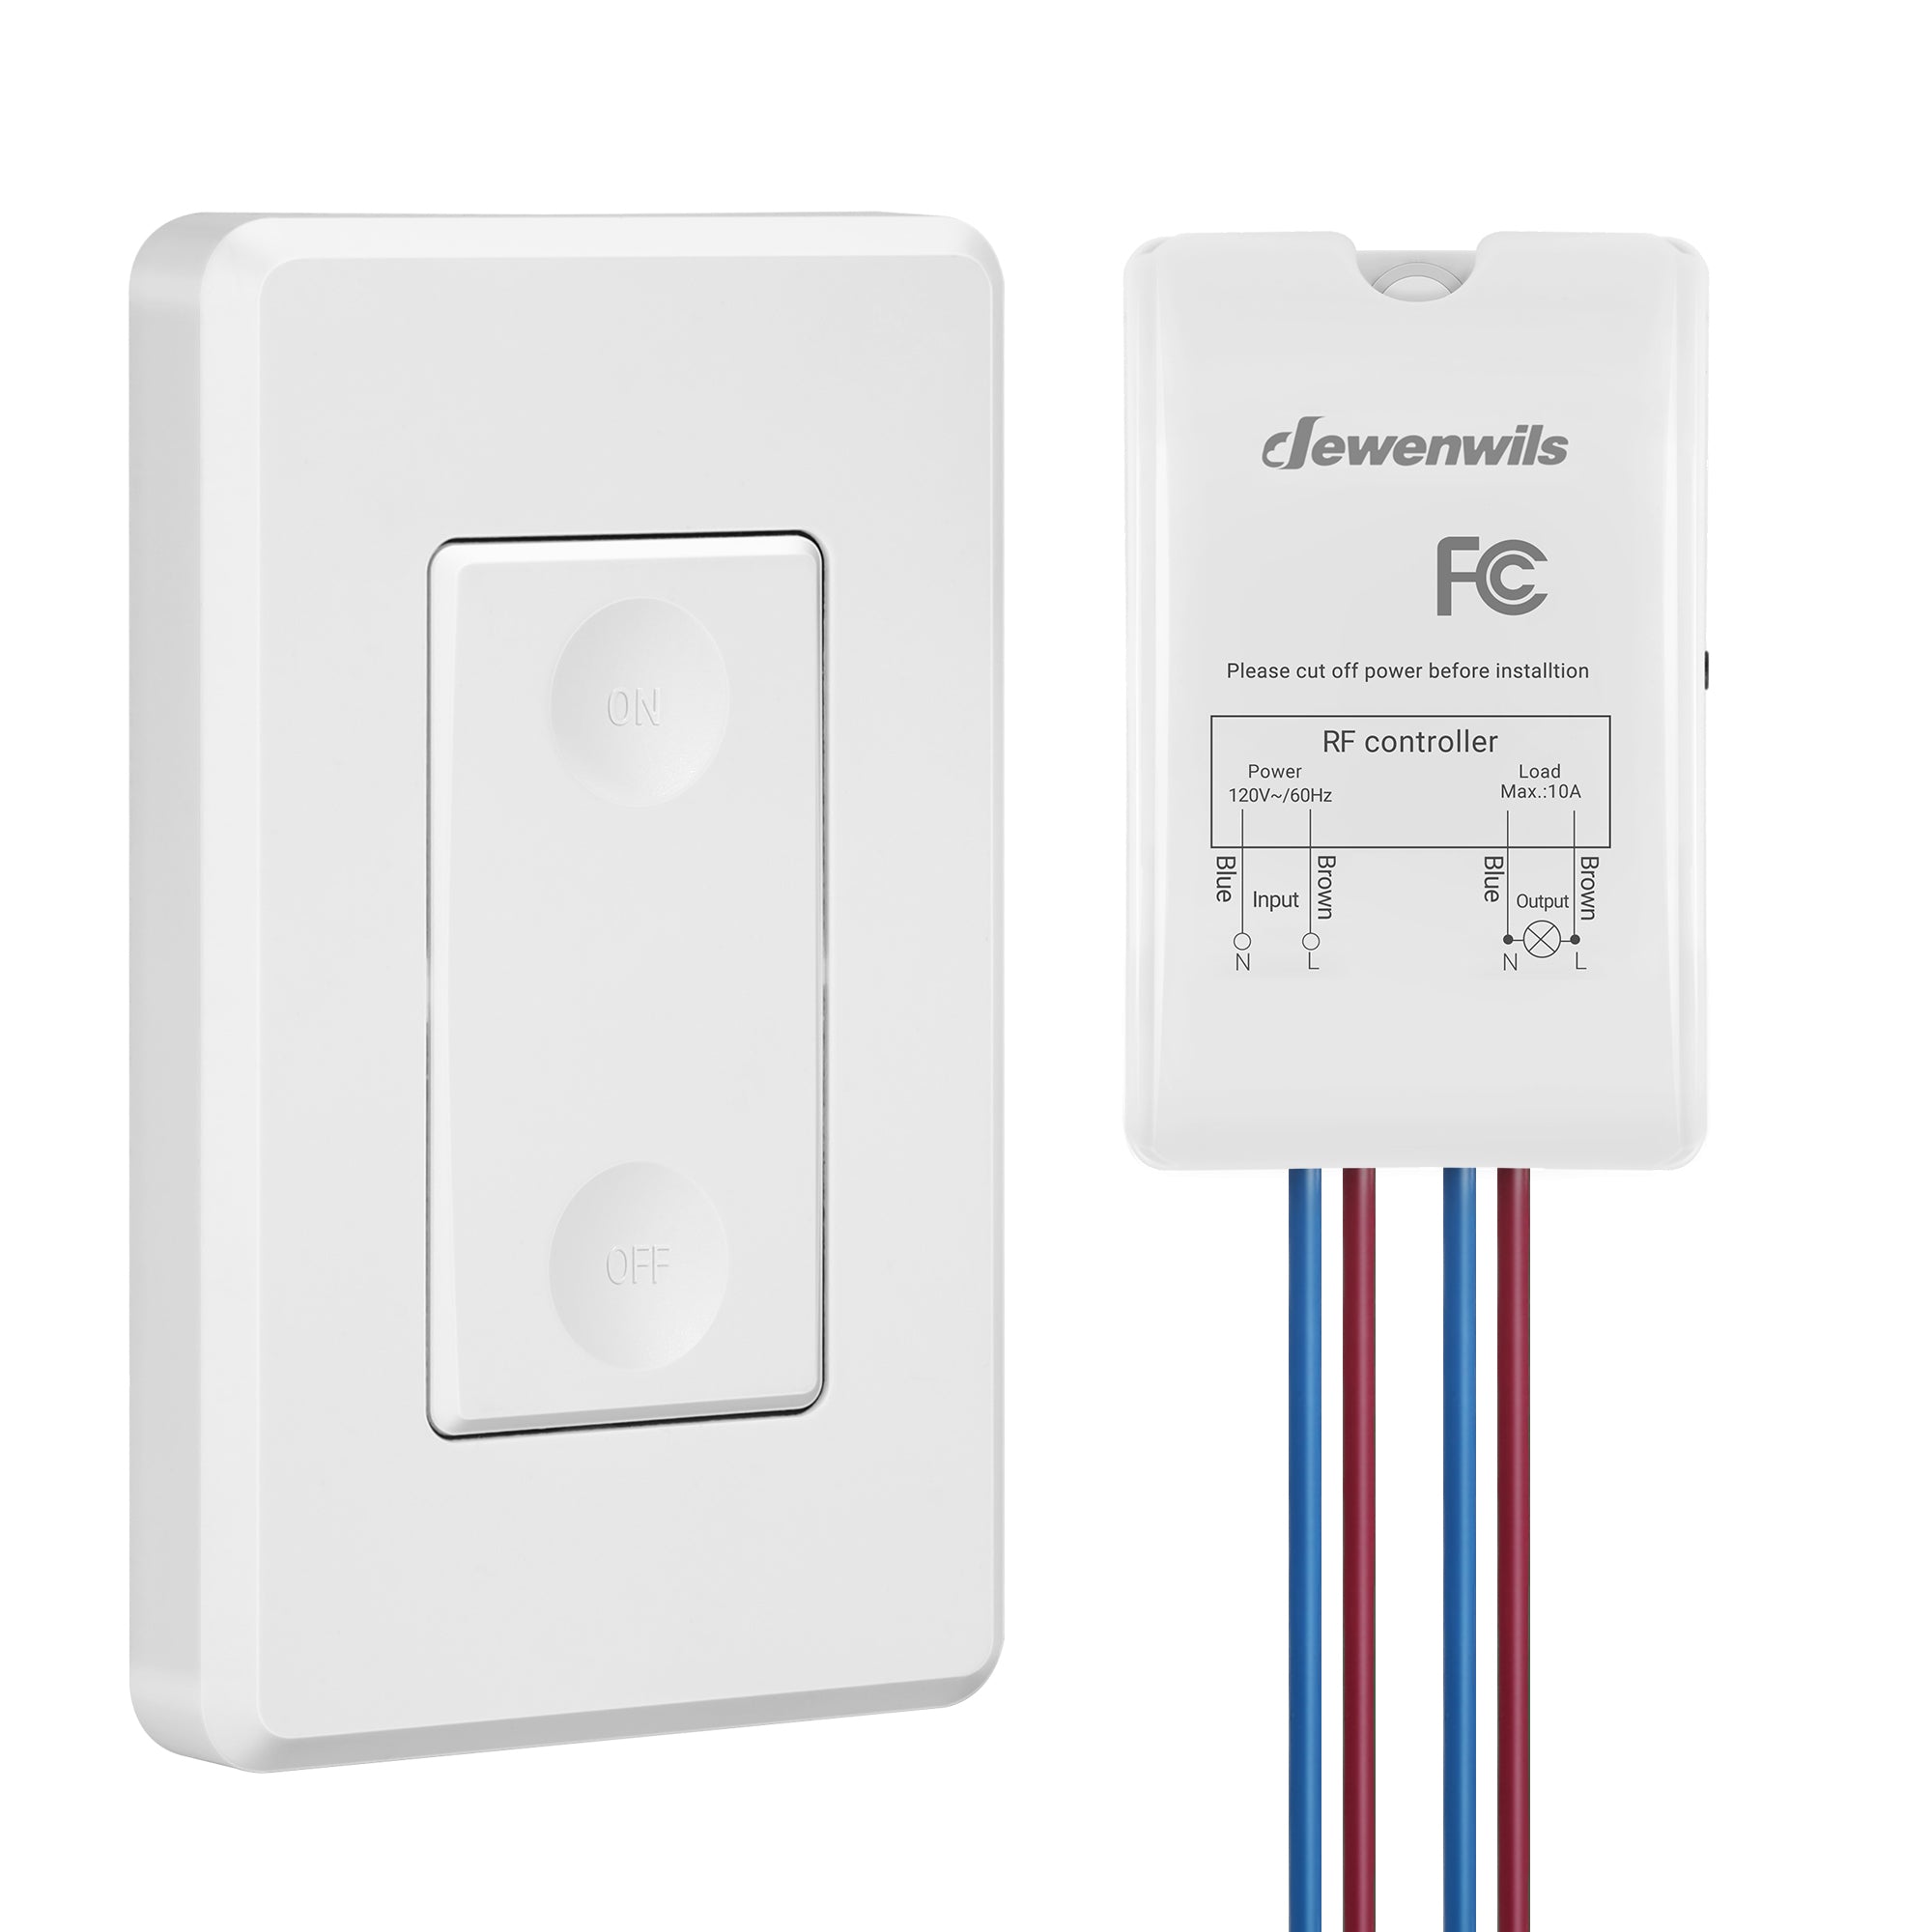 DEWENWILS Indoor Wireless Remote Control Light Switch and Outlet, 100 ft RF Range, for Lights, Fans, Lamps, Christmas Lights